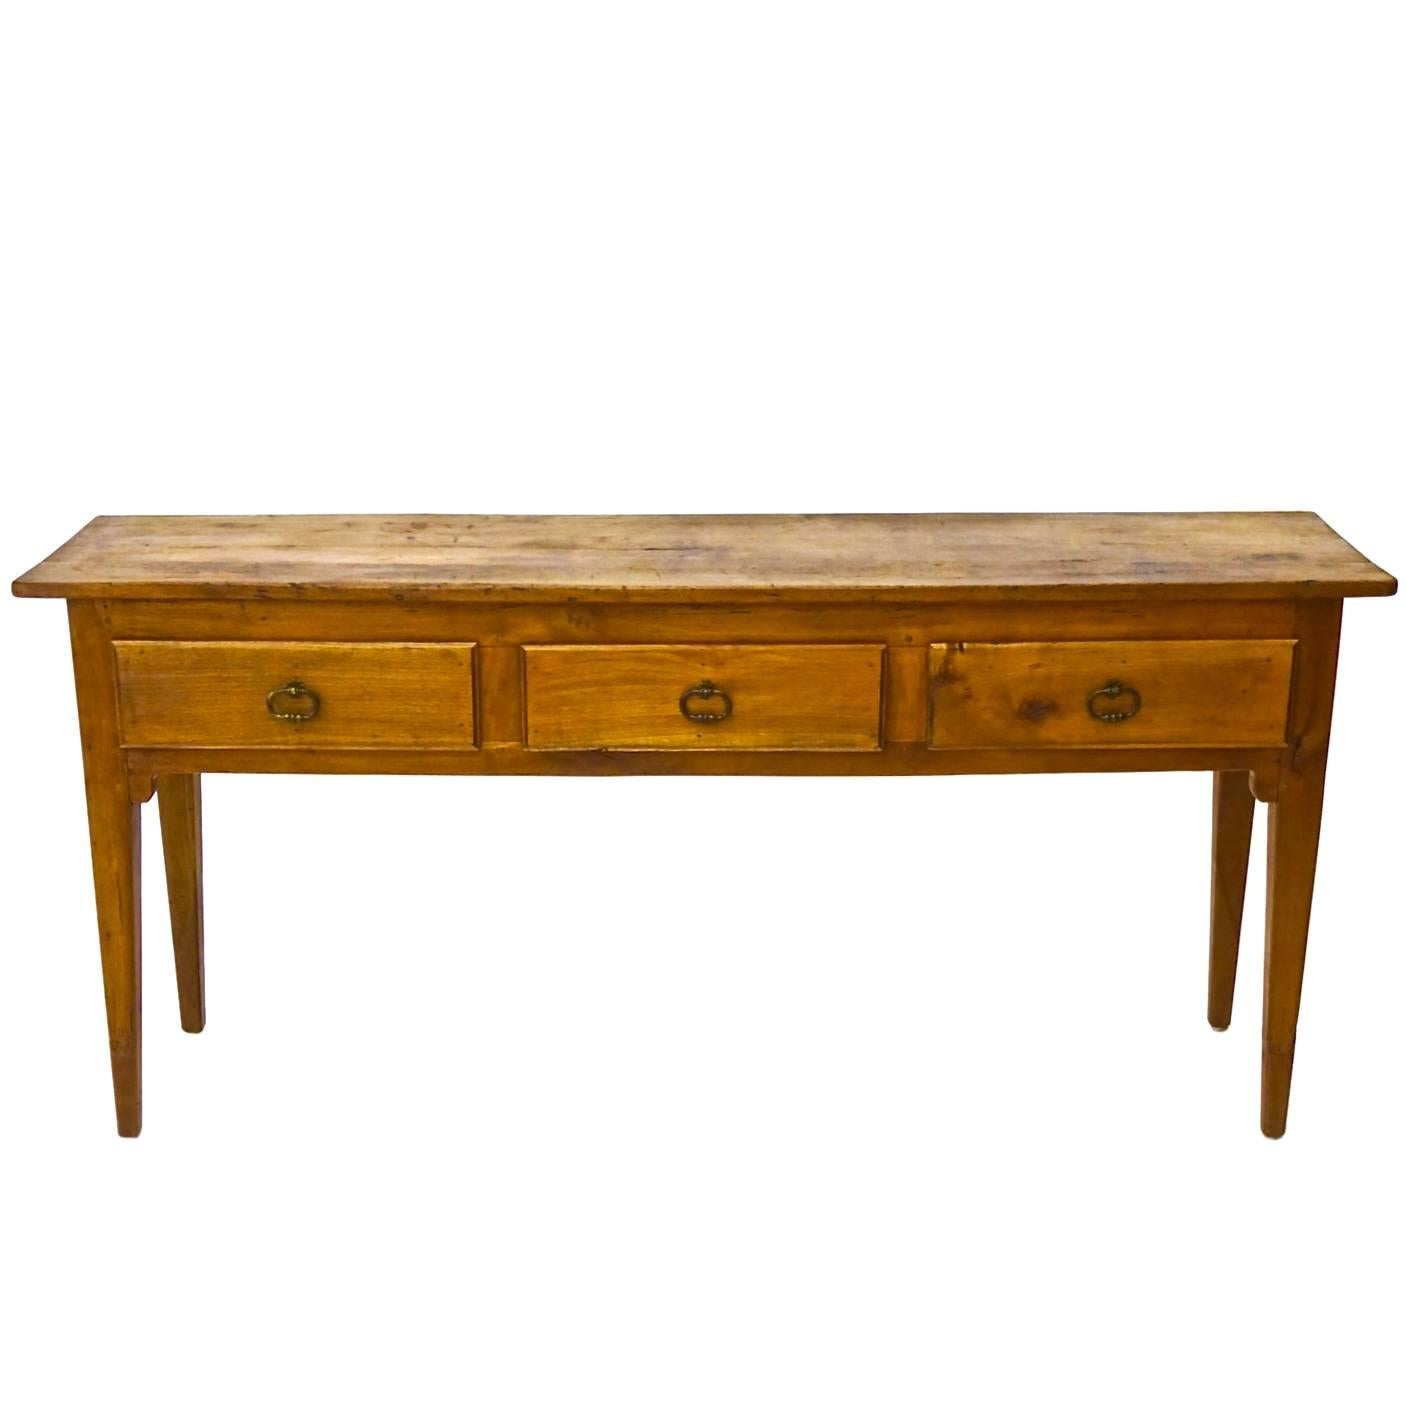 Country French Style Console Table or Sideboard